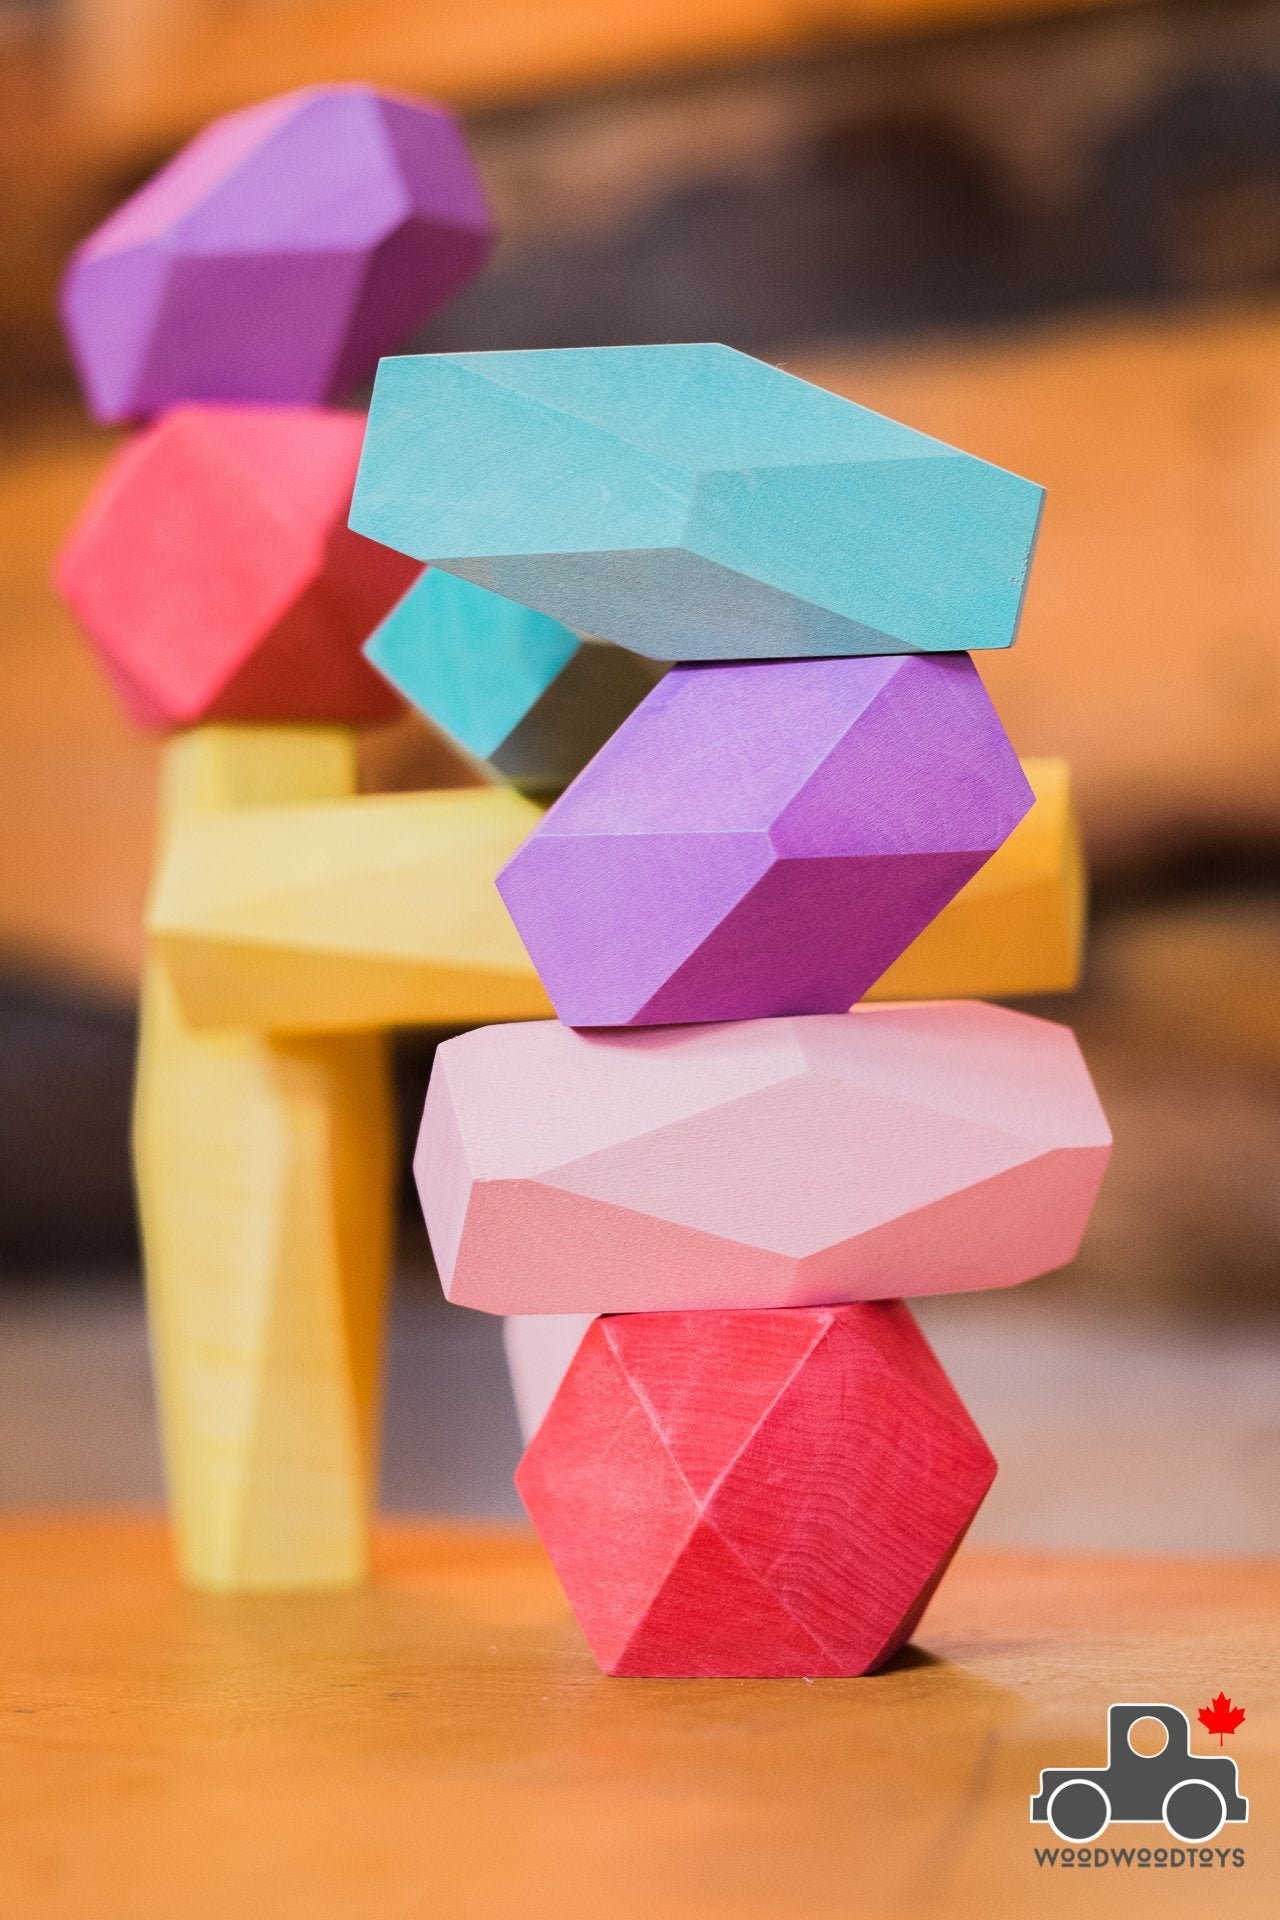 Wood Wood Exclusive Balance Blocks by Avdar - Wood Wood Toys Canada's Favourite Montessori Toy Store